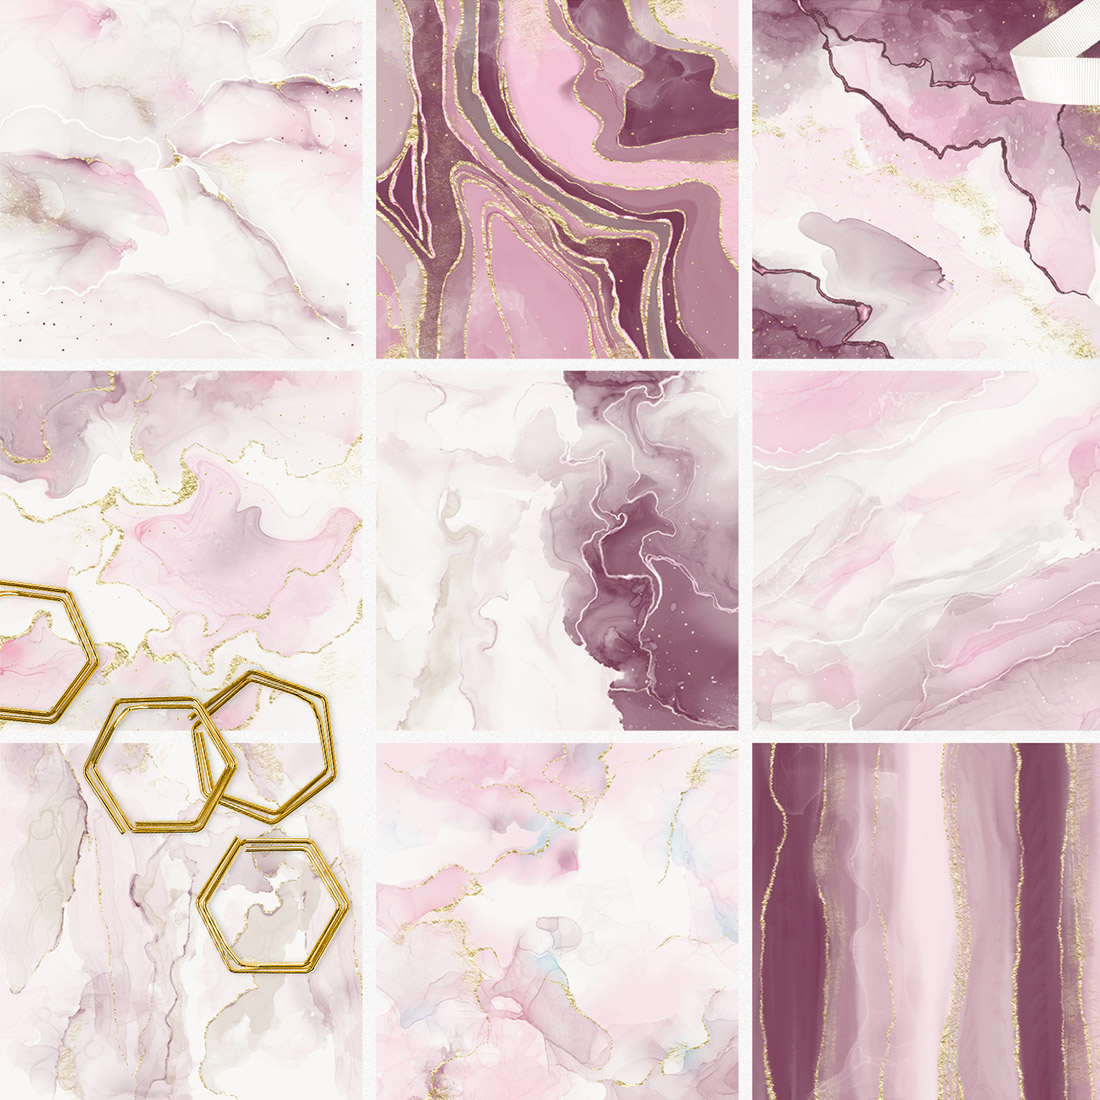 Charmed Marble Textures, Backgrounds and Borders previews.